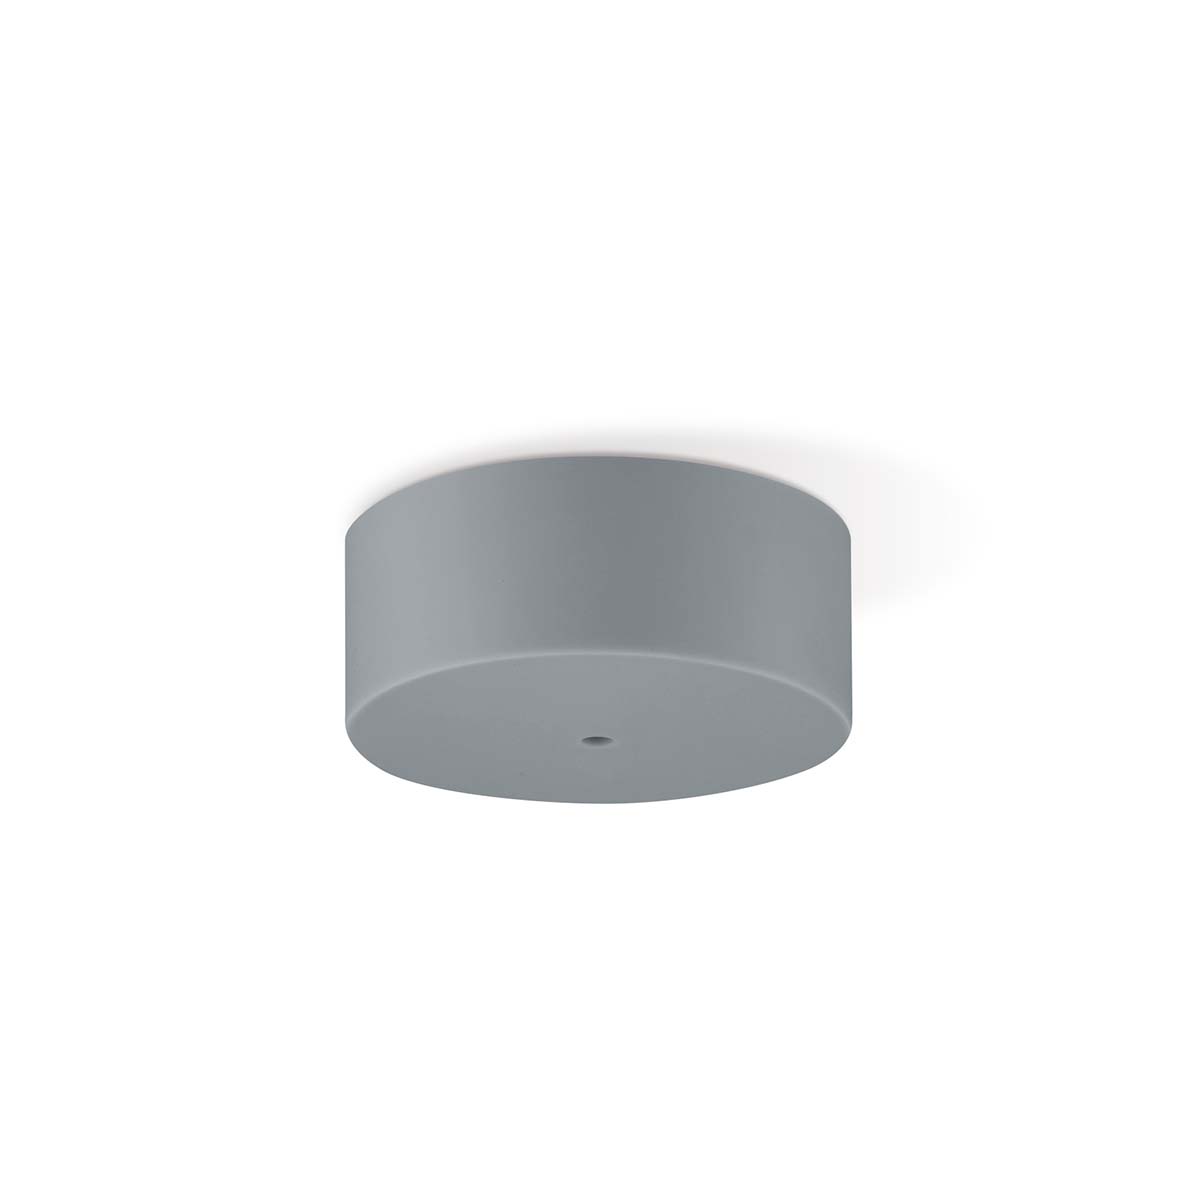 Tangla lighting - TLCP022-01GY - Silicon 1 Light round canopy cylinder - grey